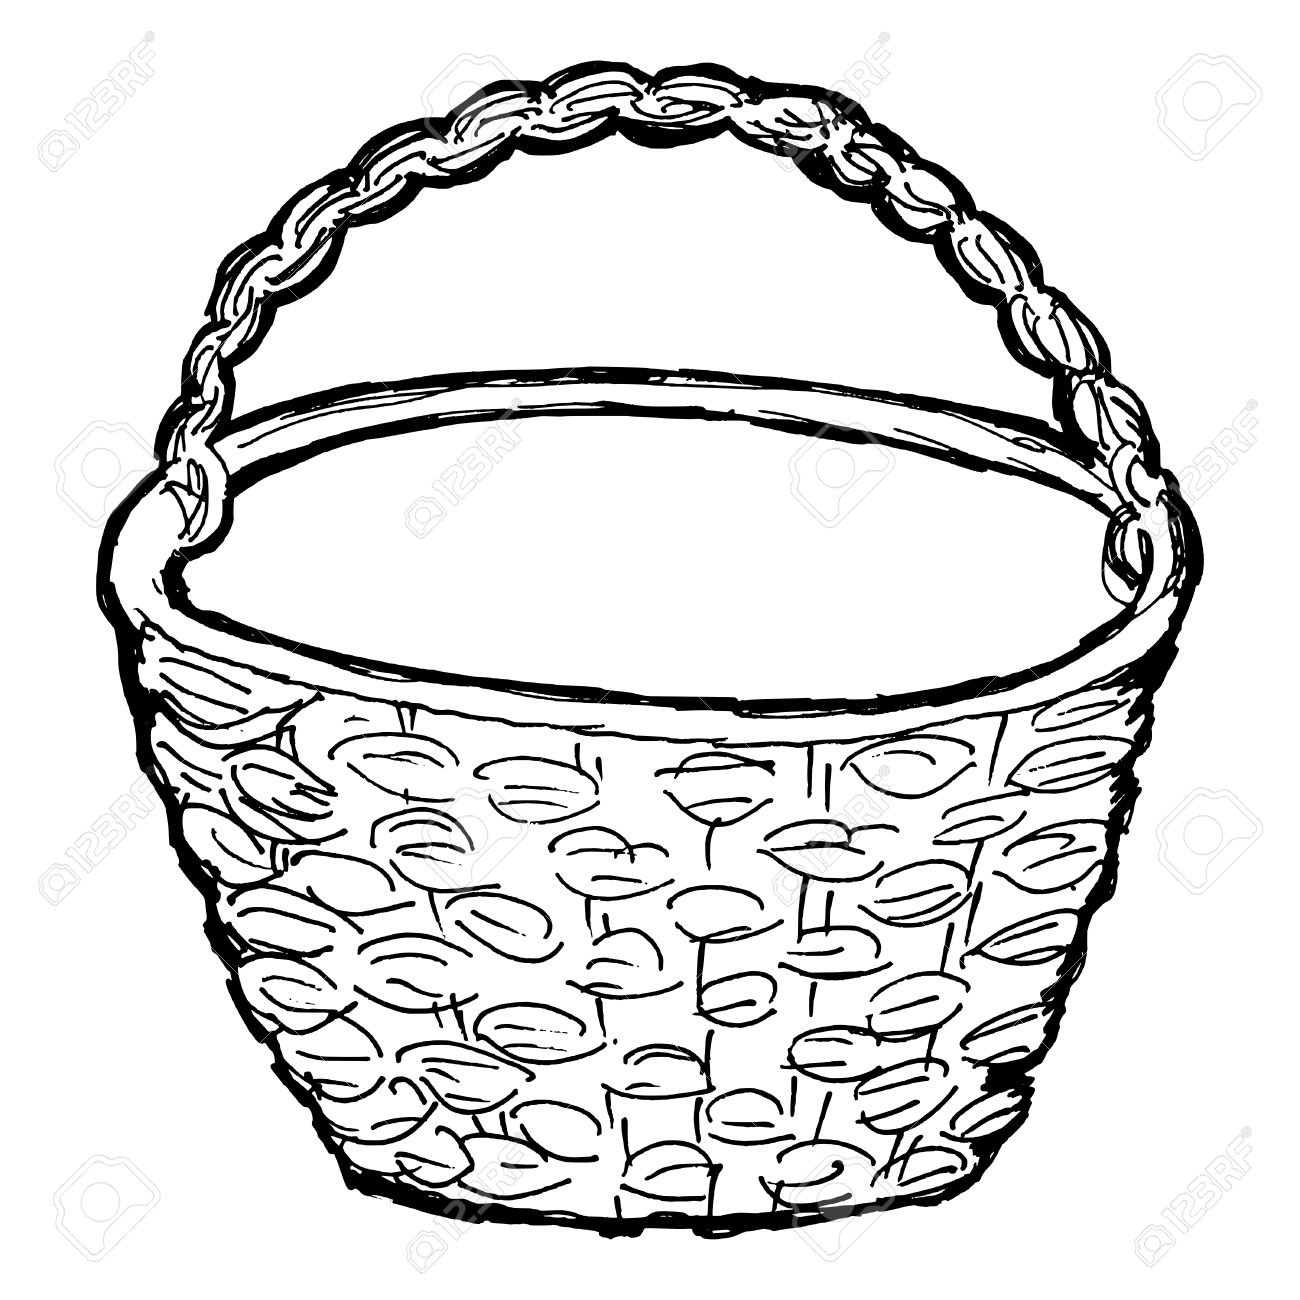 Basket clipart black and white, Basket black and white Transparent FREE